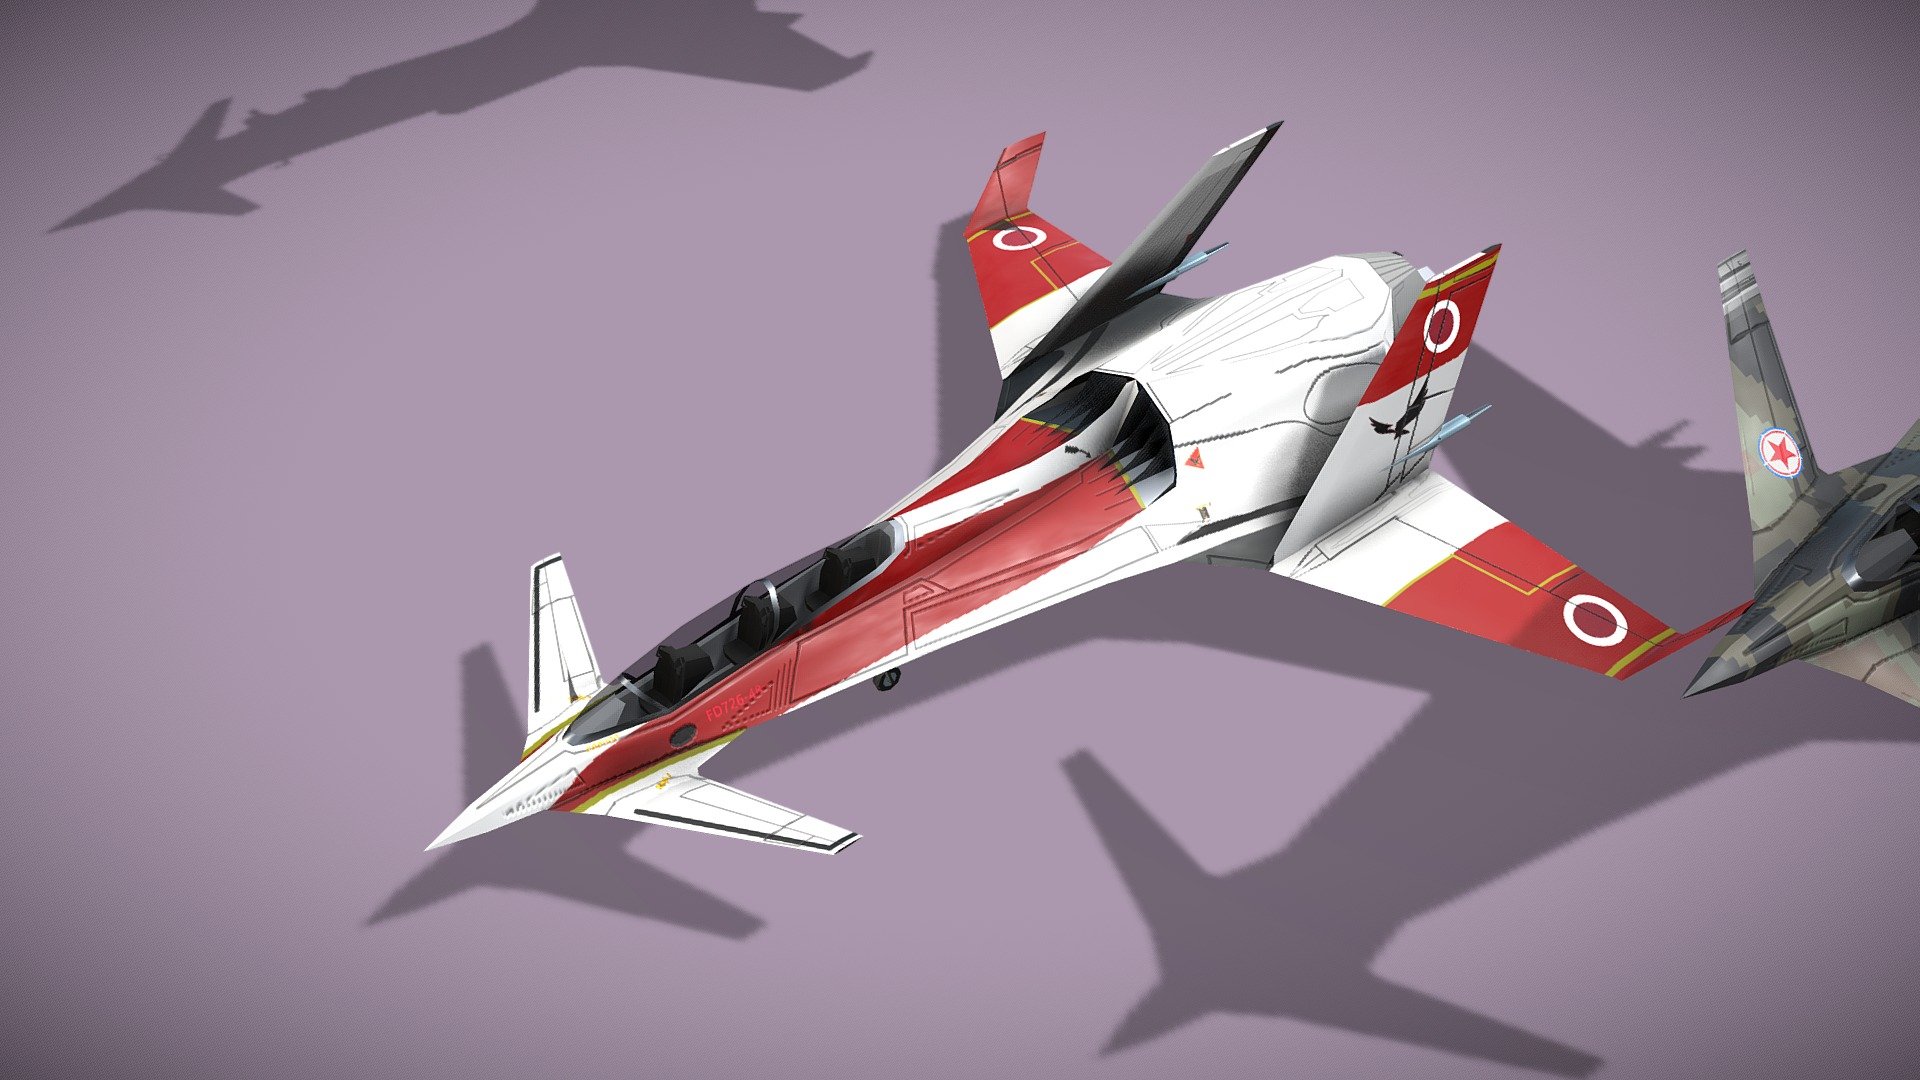 I-20 Firehawk fighter/interceptor



Lowpoly model of concept modern interceptor - generic plane



1 standing version with wheels and 2 flying versions with trails, afterburner, pilot and armament.

Model has bump map, roughness map and 3 x diffuse textures.



Check also my other aircrafts and cars.

Patreon with monthly free model - I-20 Firehawk concept jet fighter - Buy Royalty Free 3D model by NETRUNNER_pl 3d model